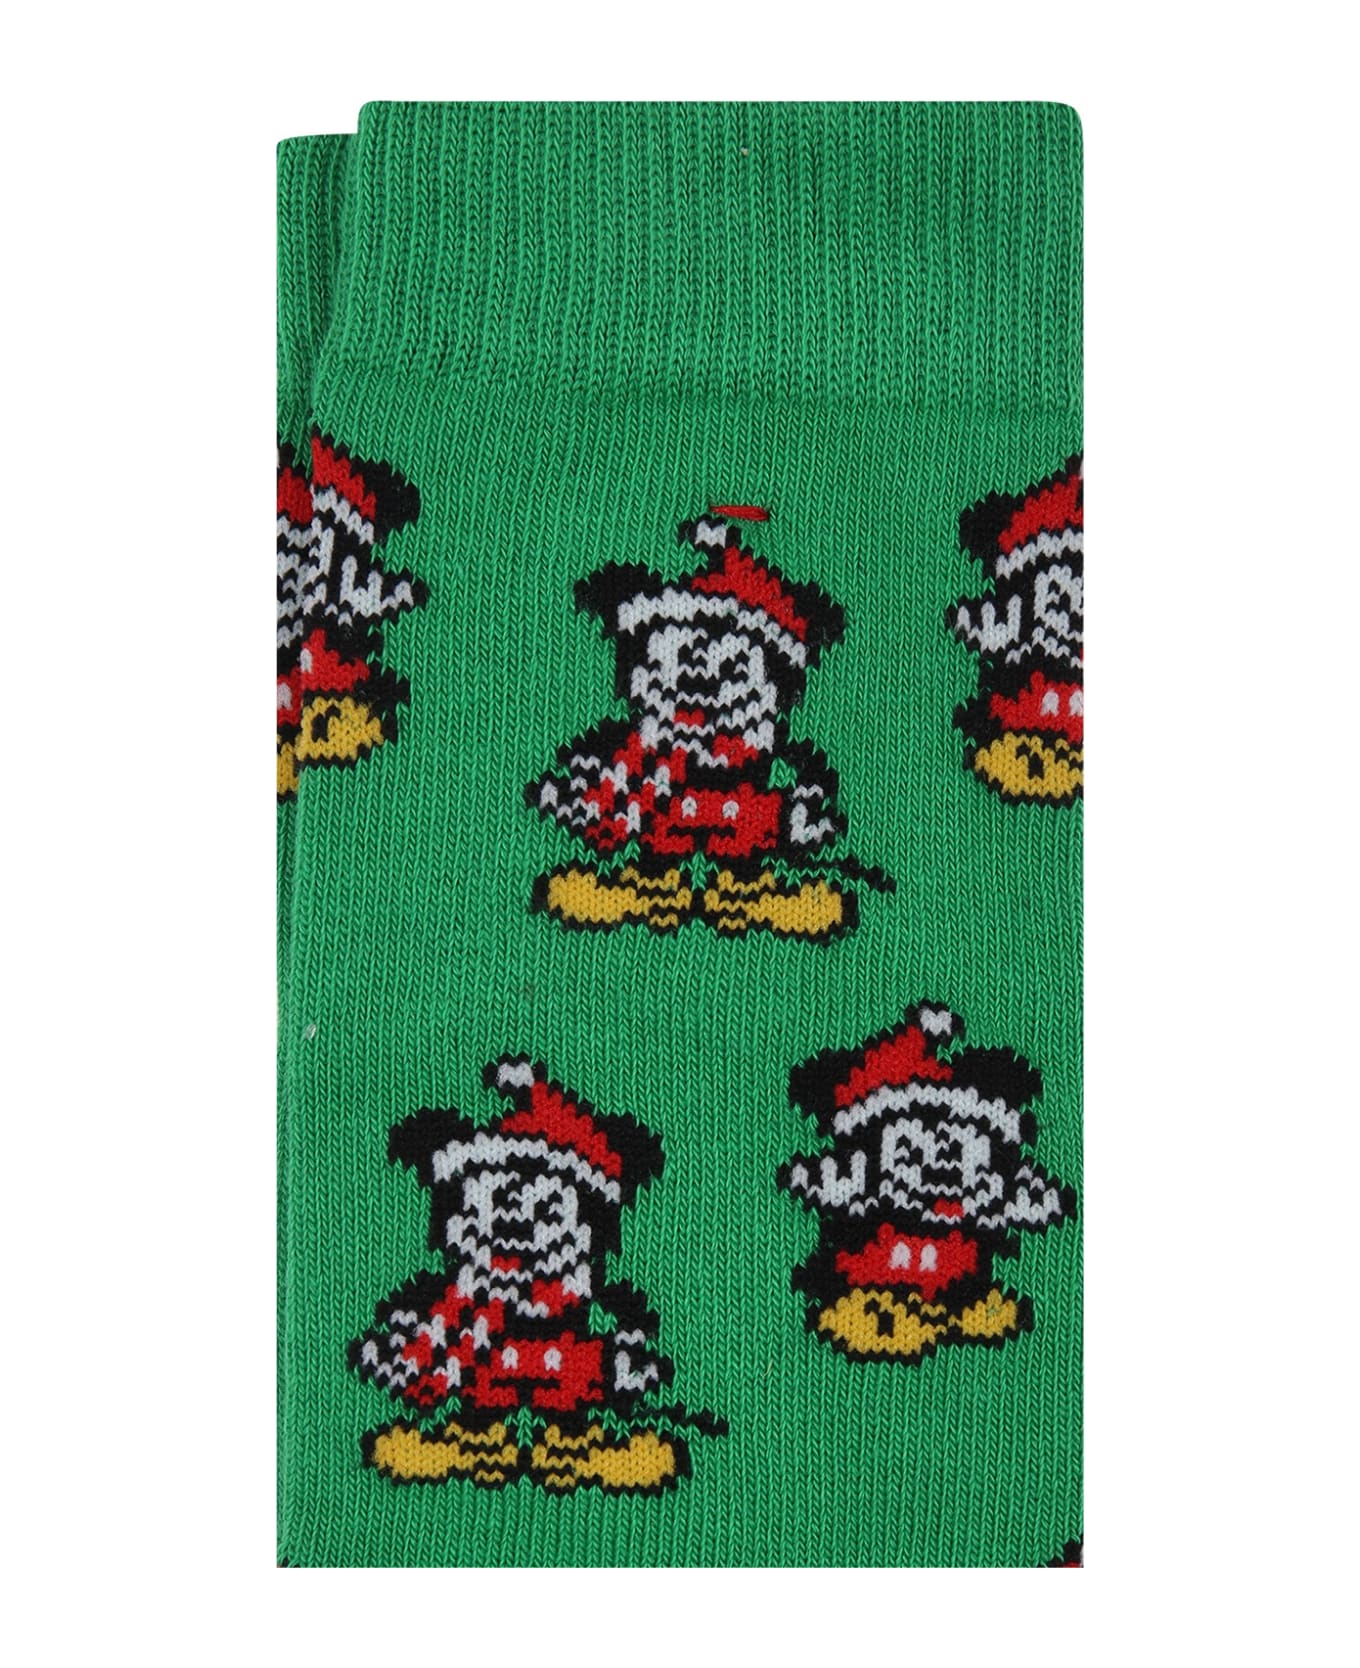 MC2 Saint Barth Green Socks For Boy With Micky Mouse - Green